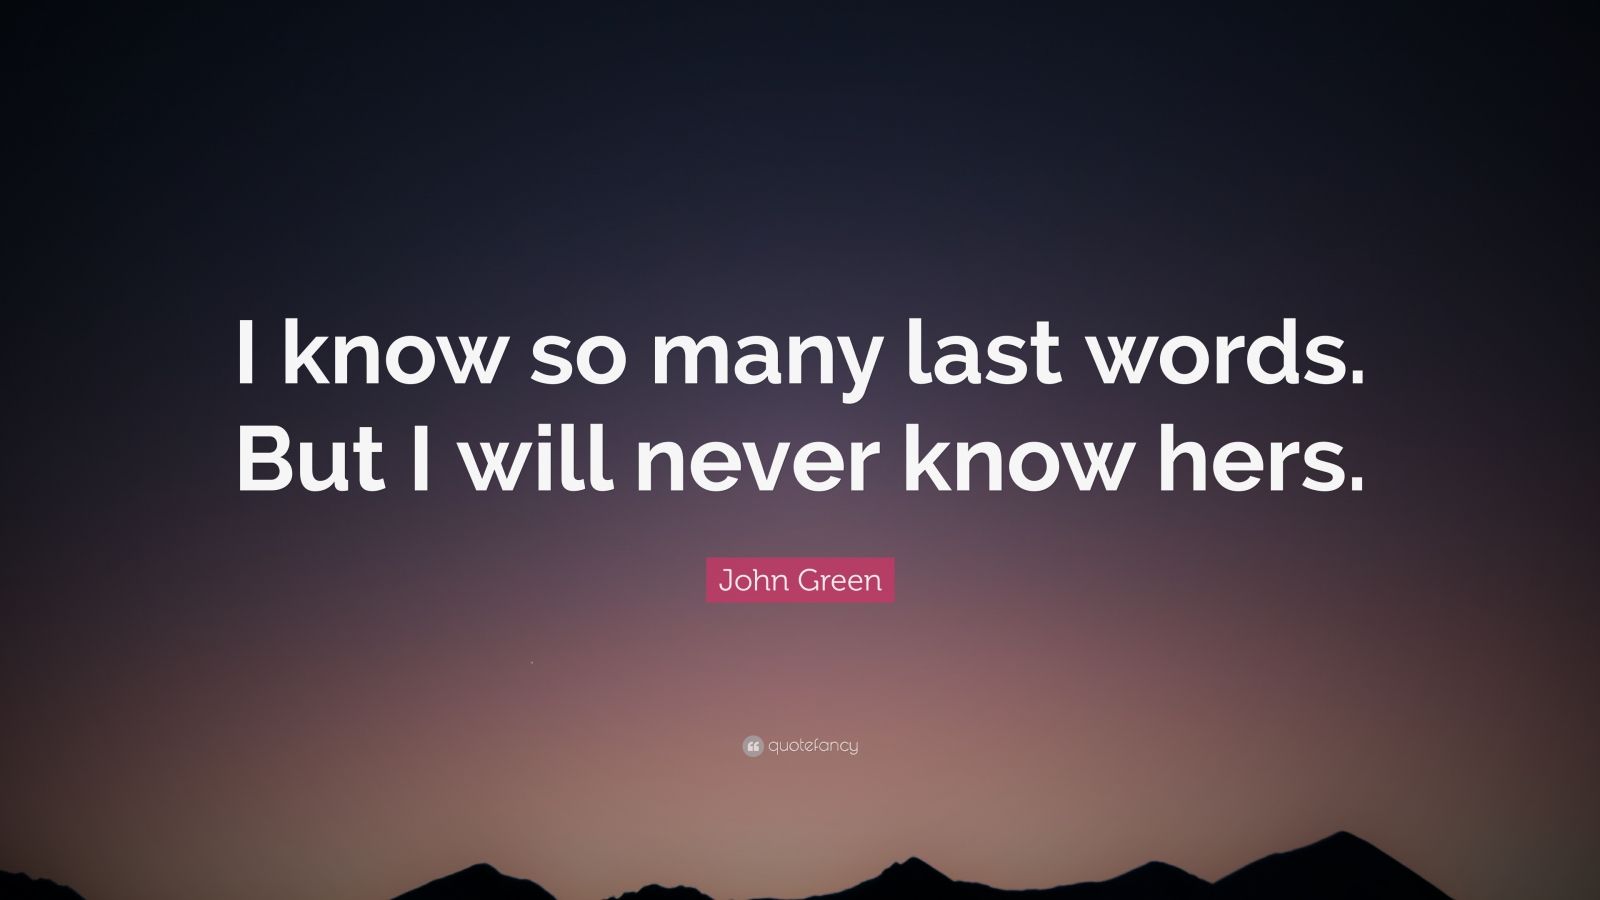 John Green Quote: “I know so many last words. But I will never know ...